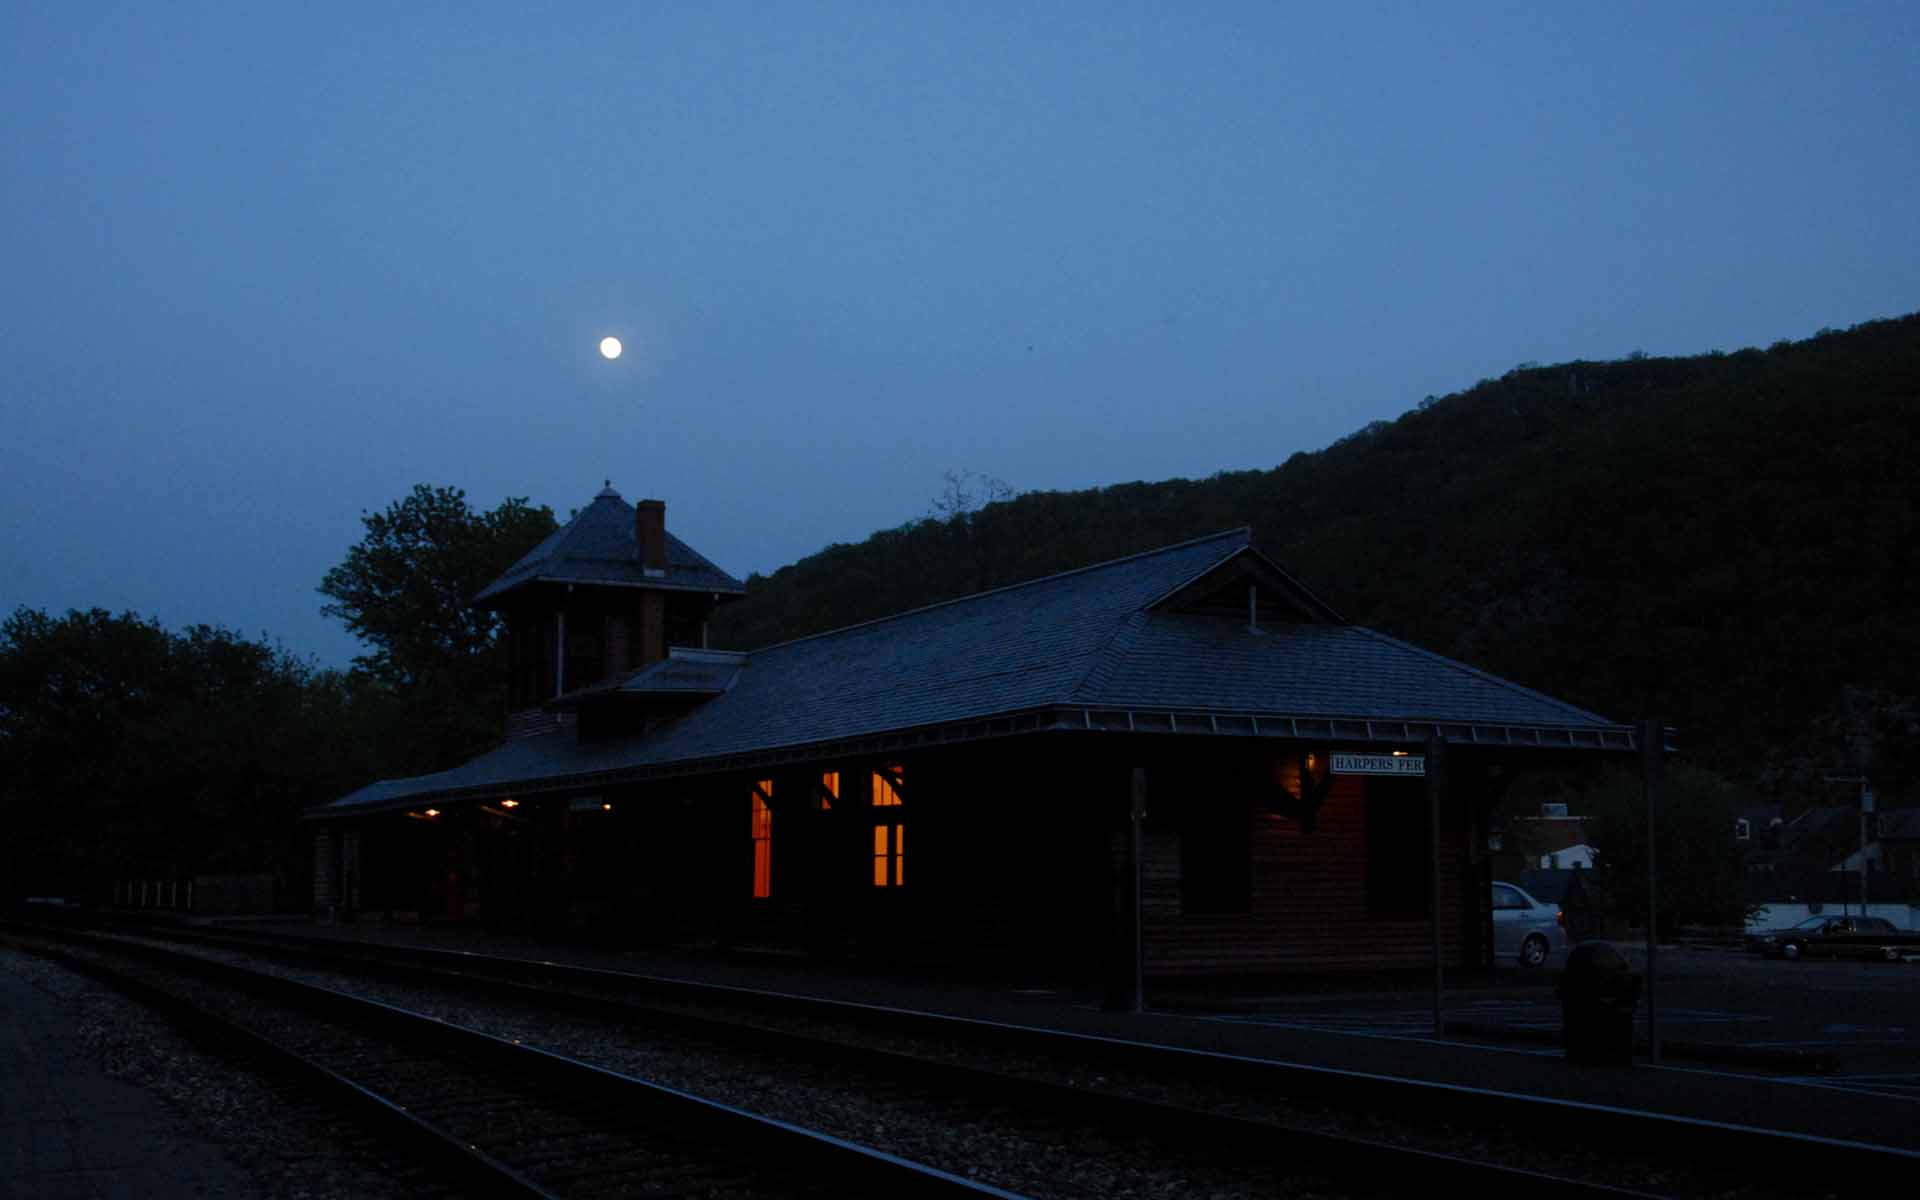 Harpers Ferry Station